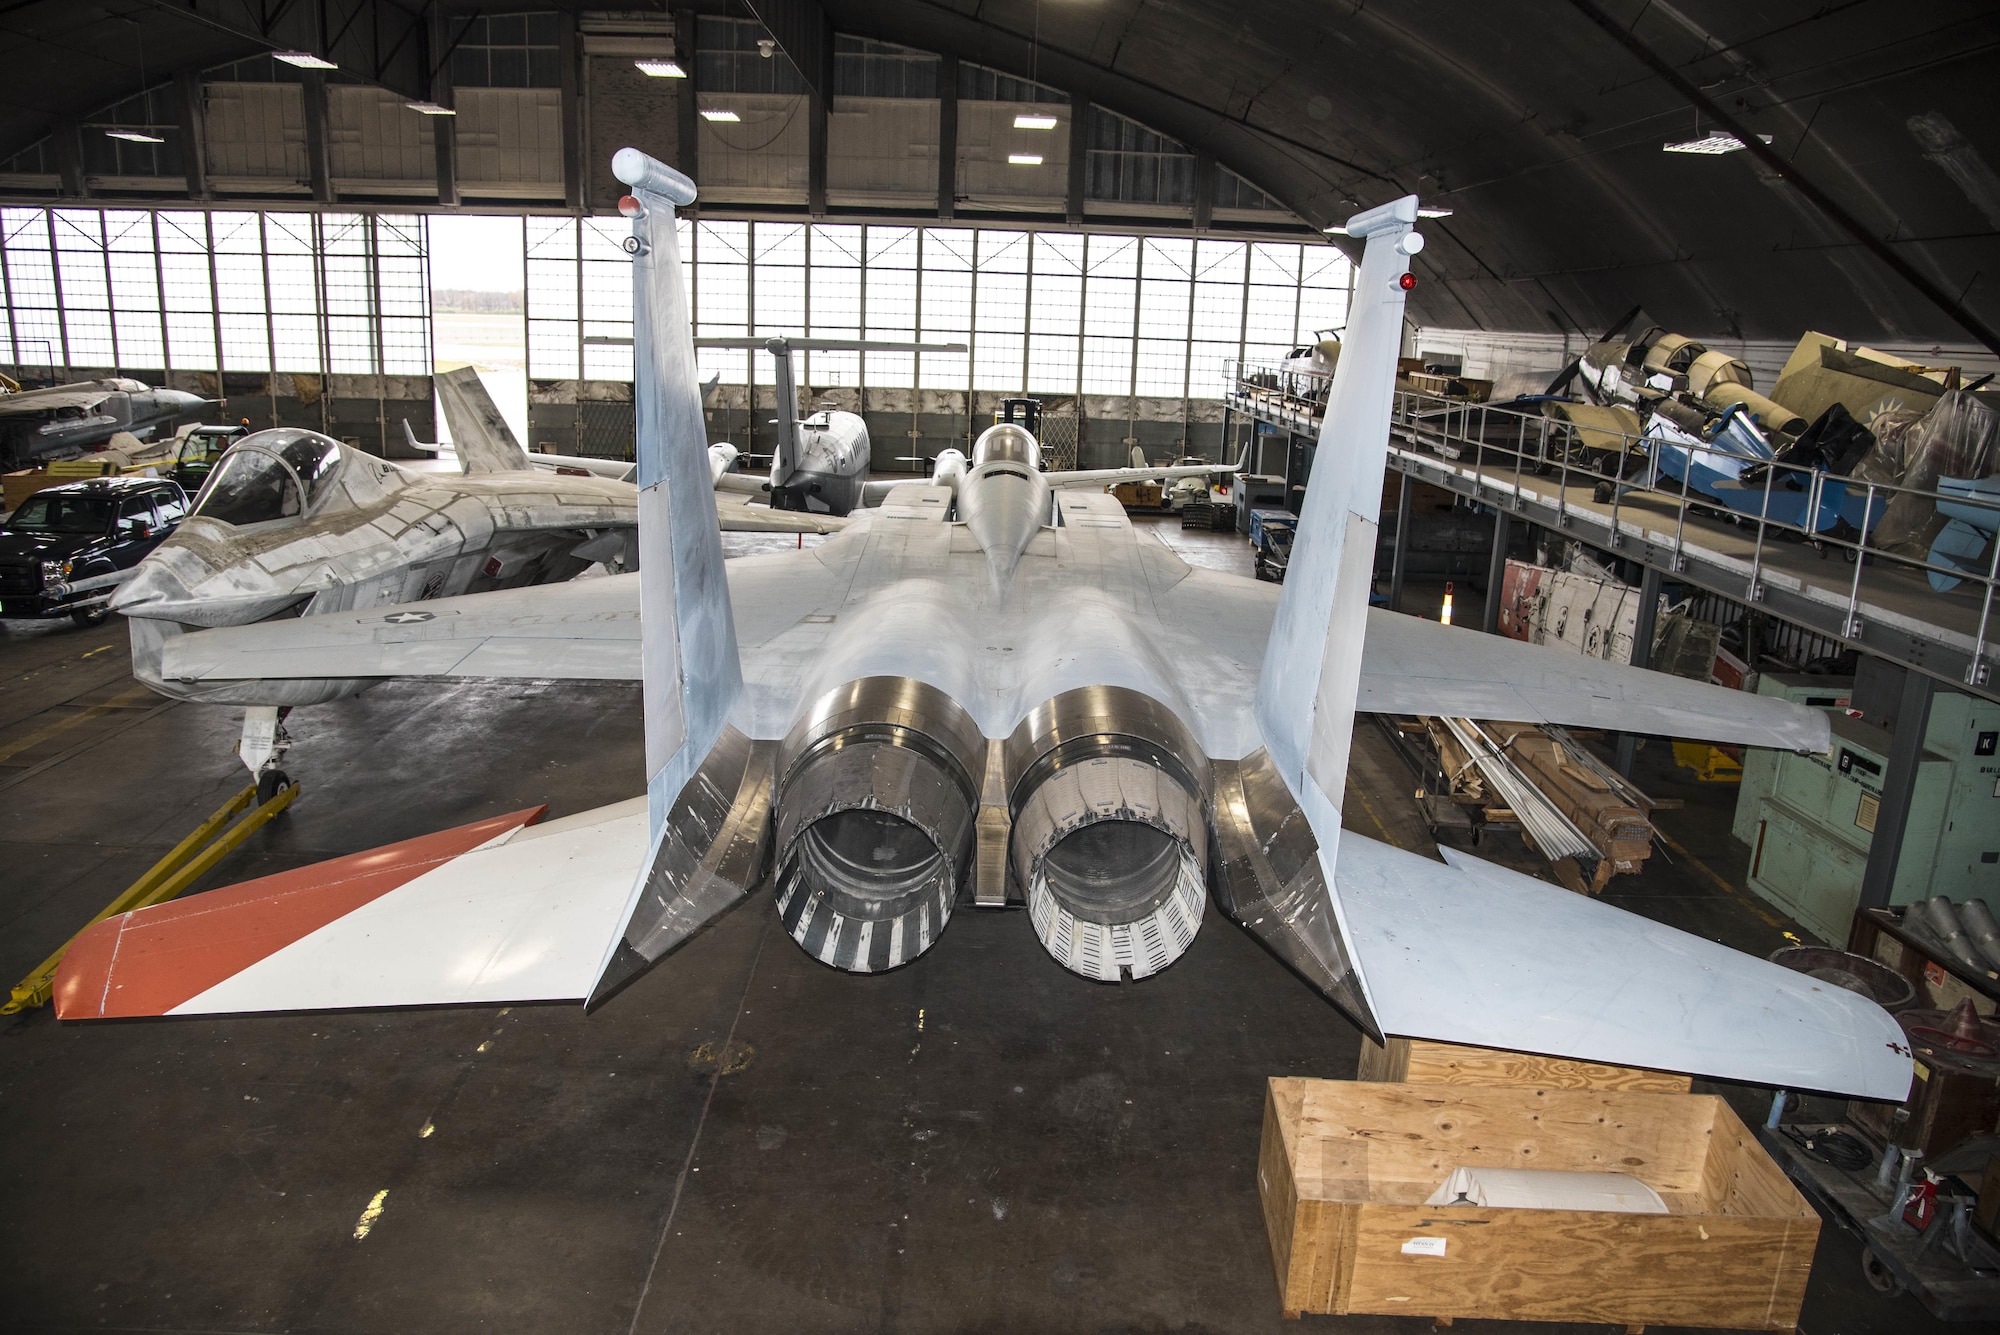 DAYTON, Ohio -- The McDonnell Douglas F-15 Streak Eagle is currently in storage at the National Museum of the United States Air Force. This aircraft can be viewed on the Behind the Scenes Tours. (U.S. Air Force photo by Ken LaRock)
